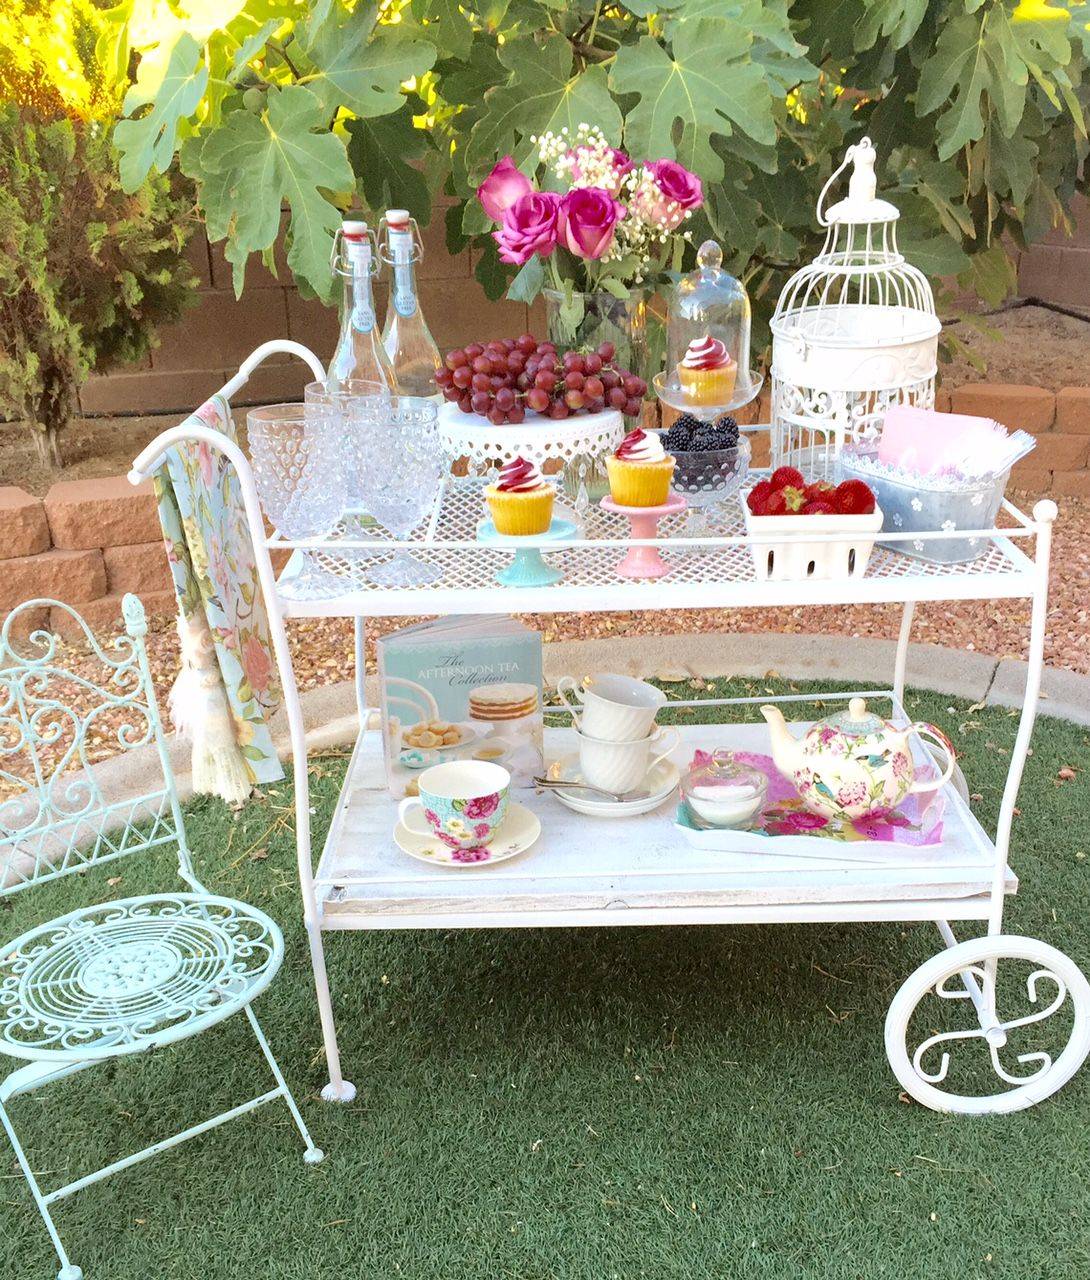 Gardenoutdoor Themed Table Decorations